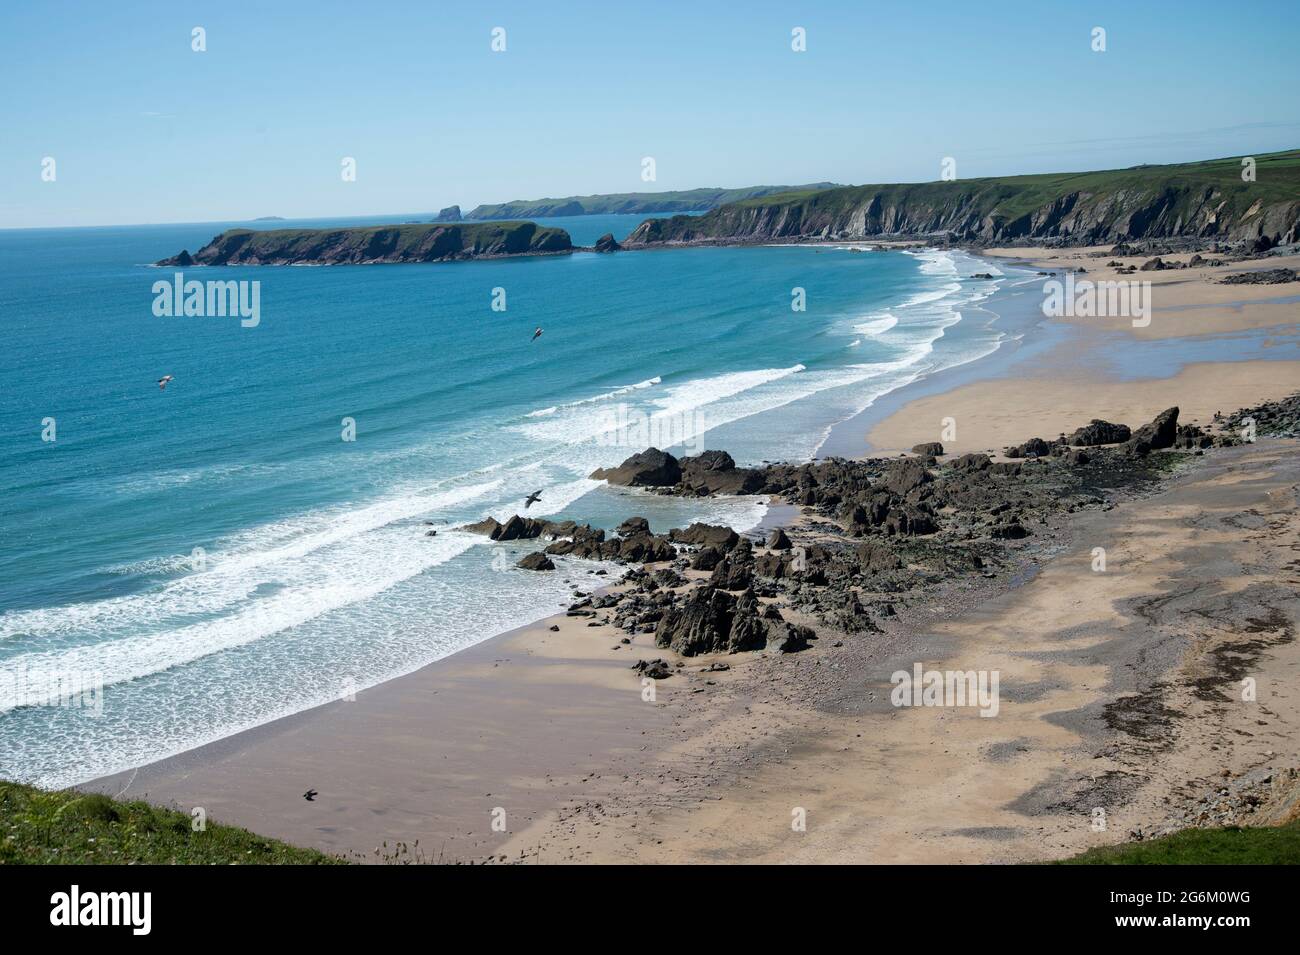 Dale, Pembrokeshire, Wales. Marloes beach. Stock Photo